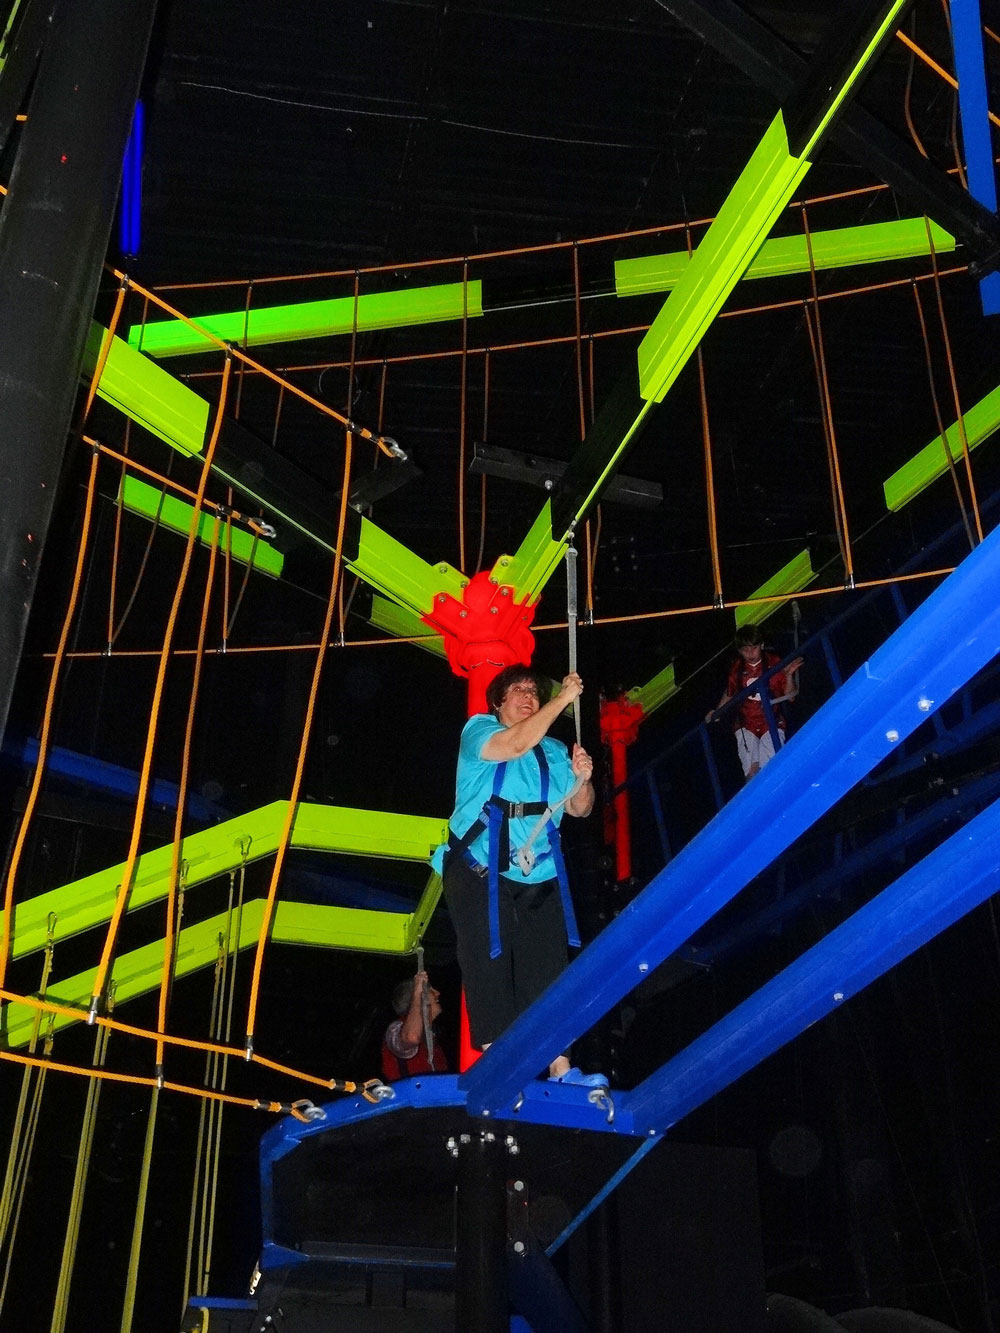 Ropes Course Hung from the Ceiling, Orlando, FL 2013